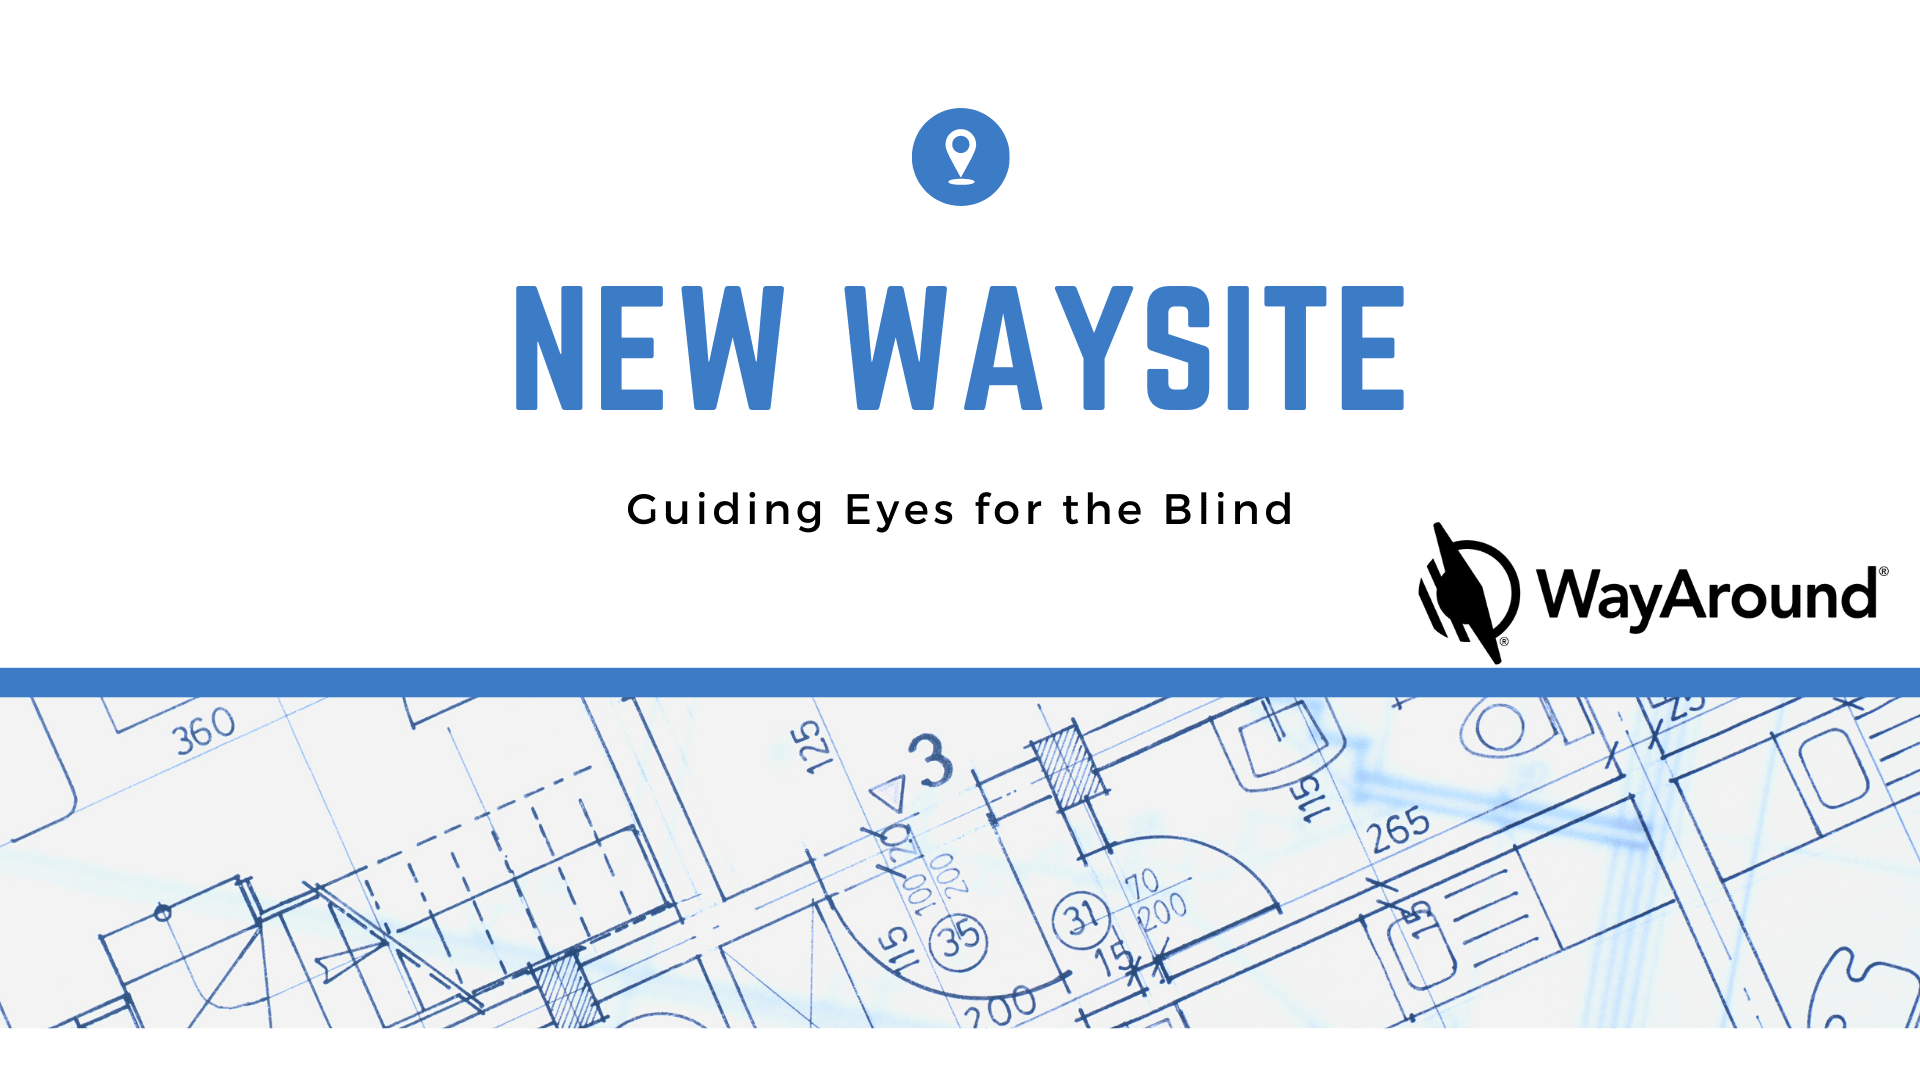 Light gray background with blue text that says New WaySite. Guiding Eyes for the Blind. There is a You Are Here Icon at the top and the WayAround logo on the side. The bottom section of the image shows a floorplan.